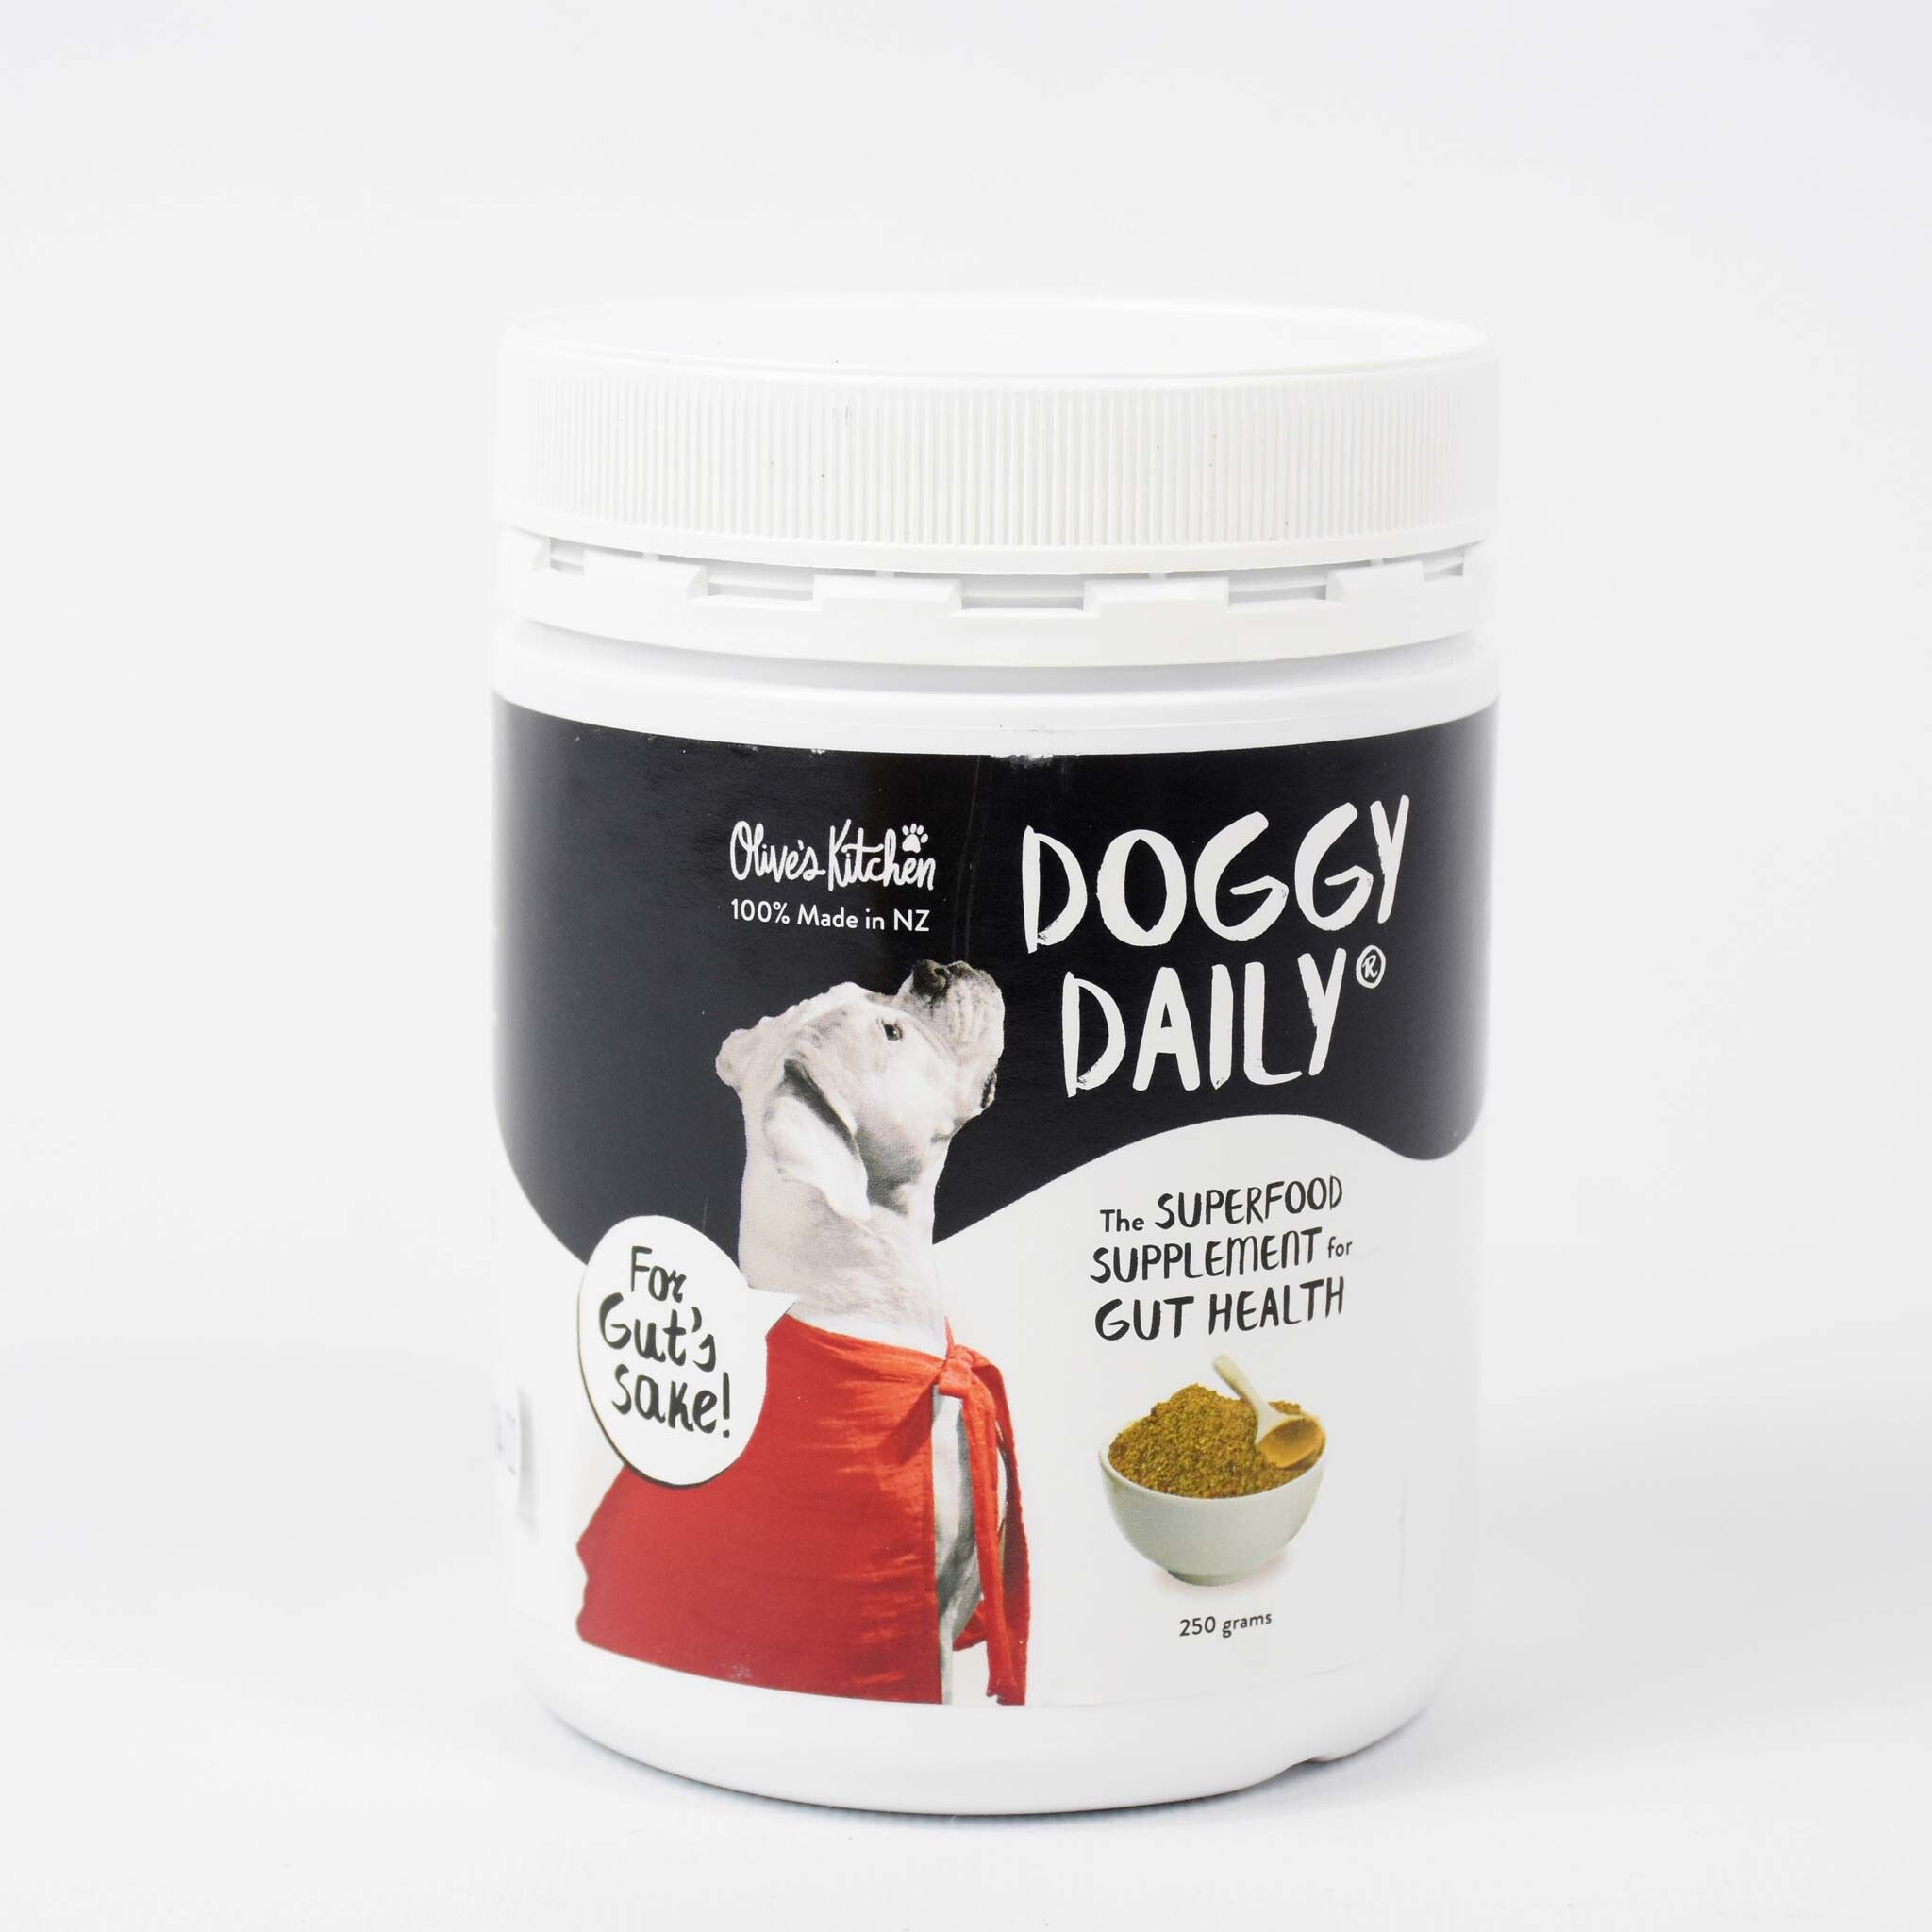 Doggy Daily Superfood Supplement - 250g